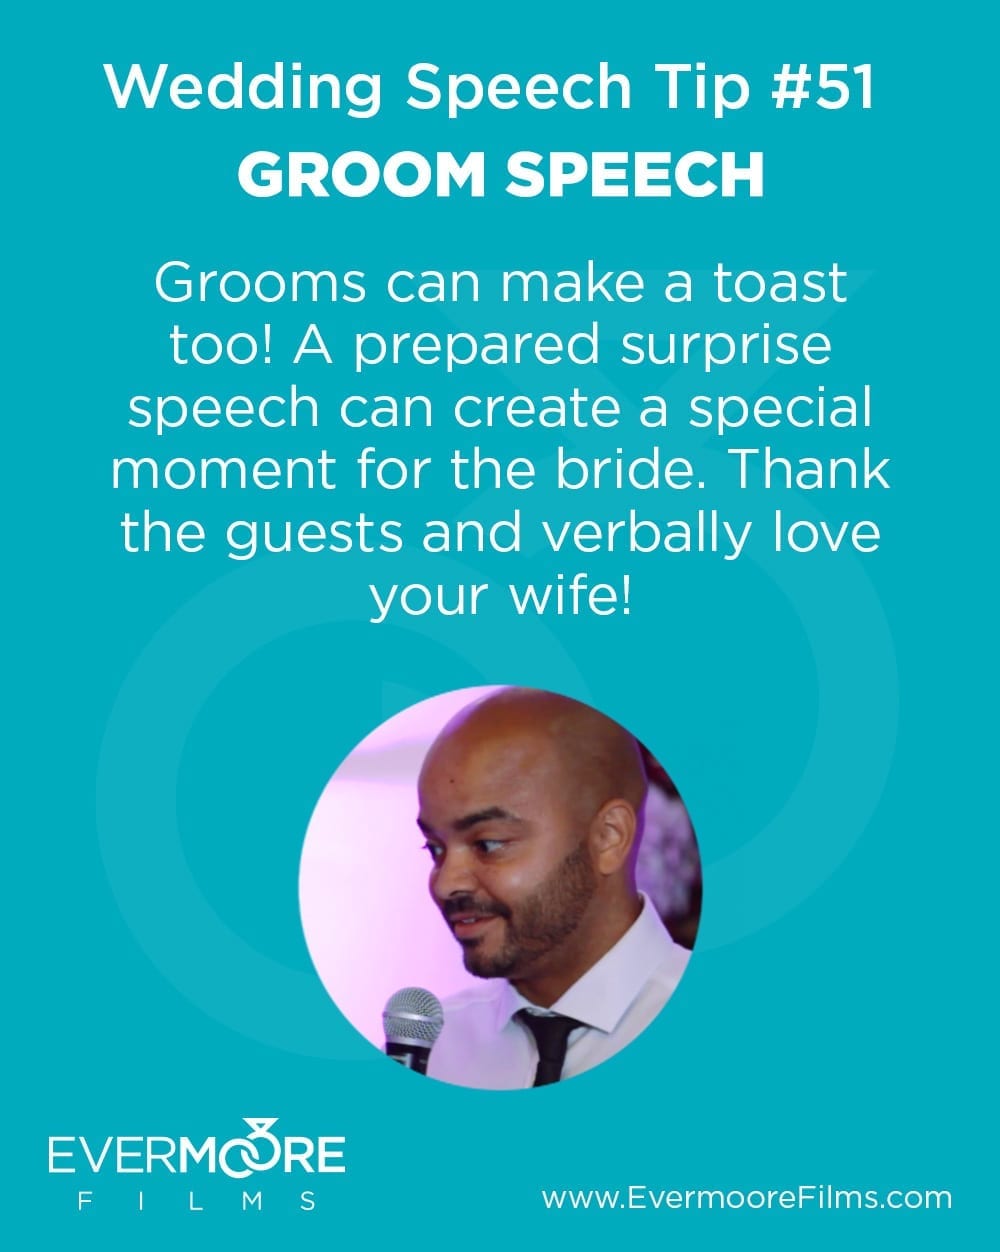 Groom Speech | Wedding Speech Tip #51 | Grooms can make a toast too! A prepared surprise speech can create a special moment for the bride. Thank the guests and verbally love your wife!